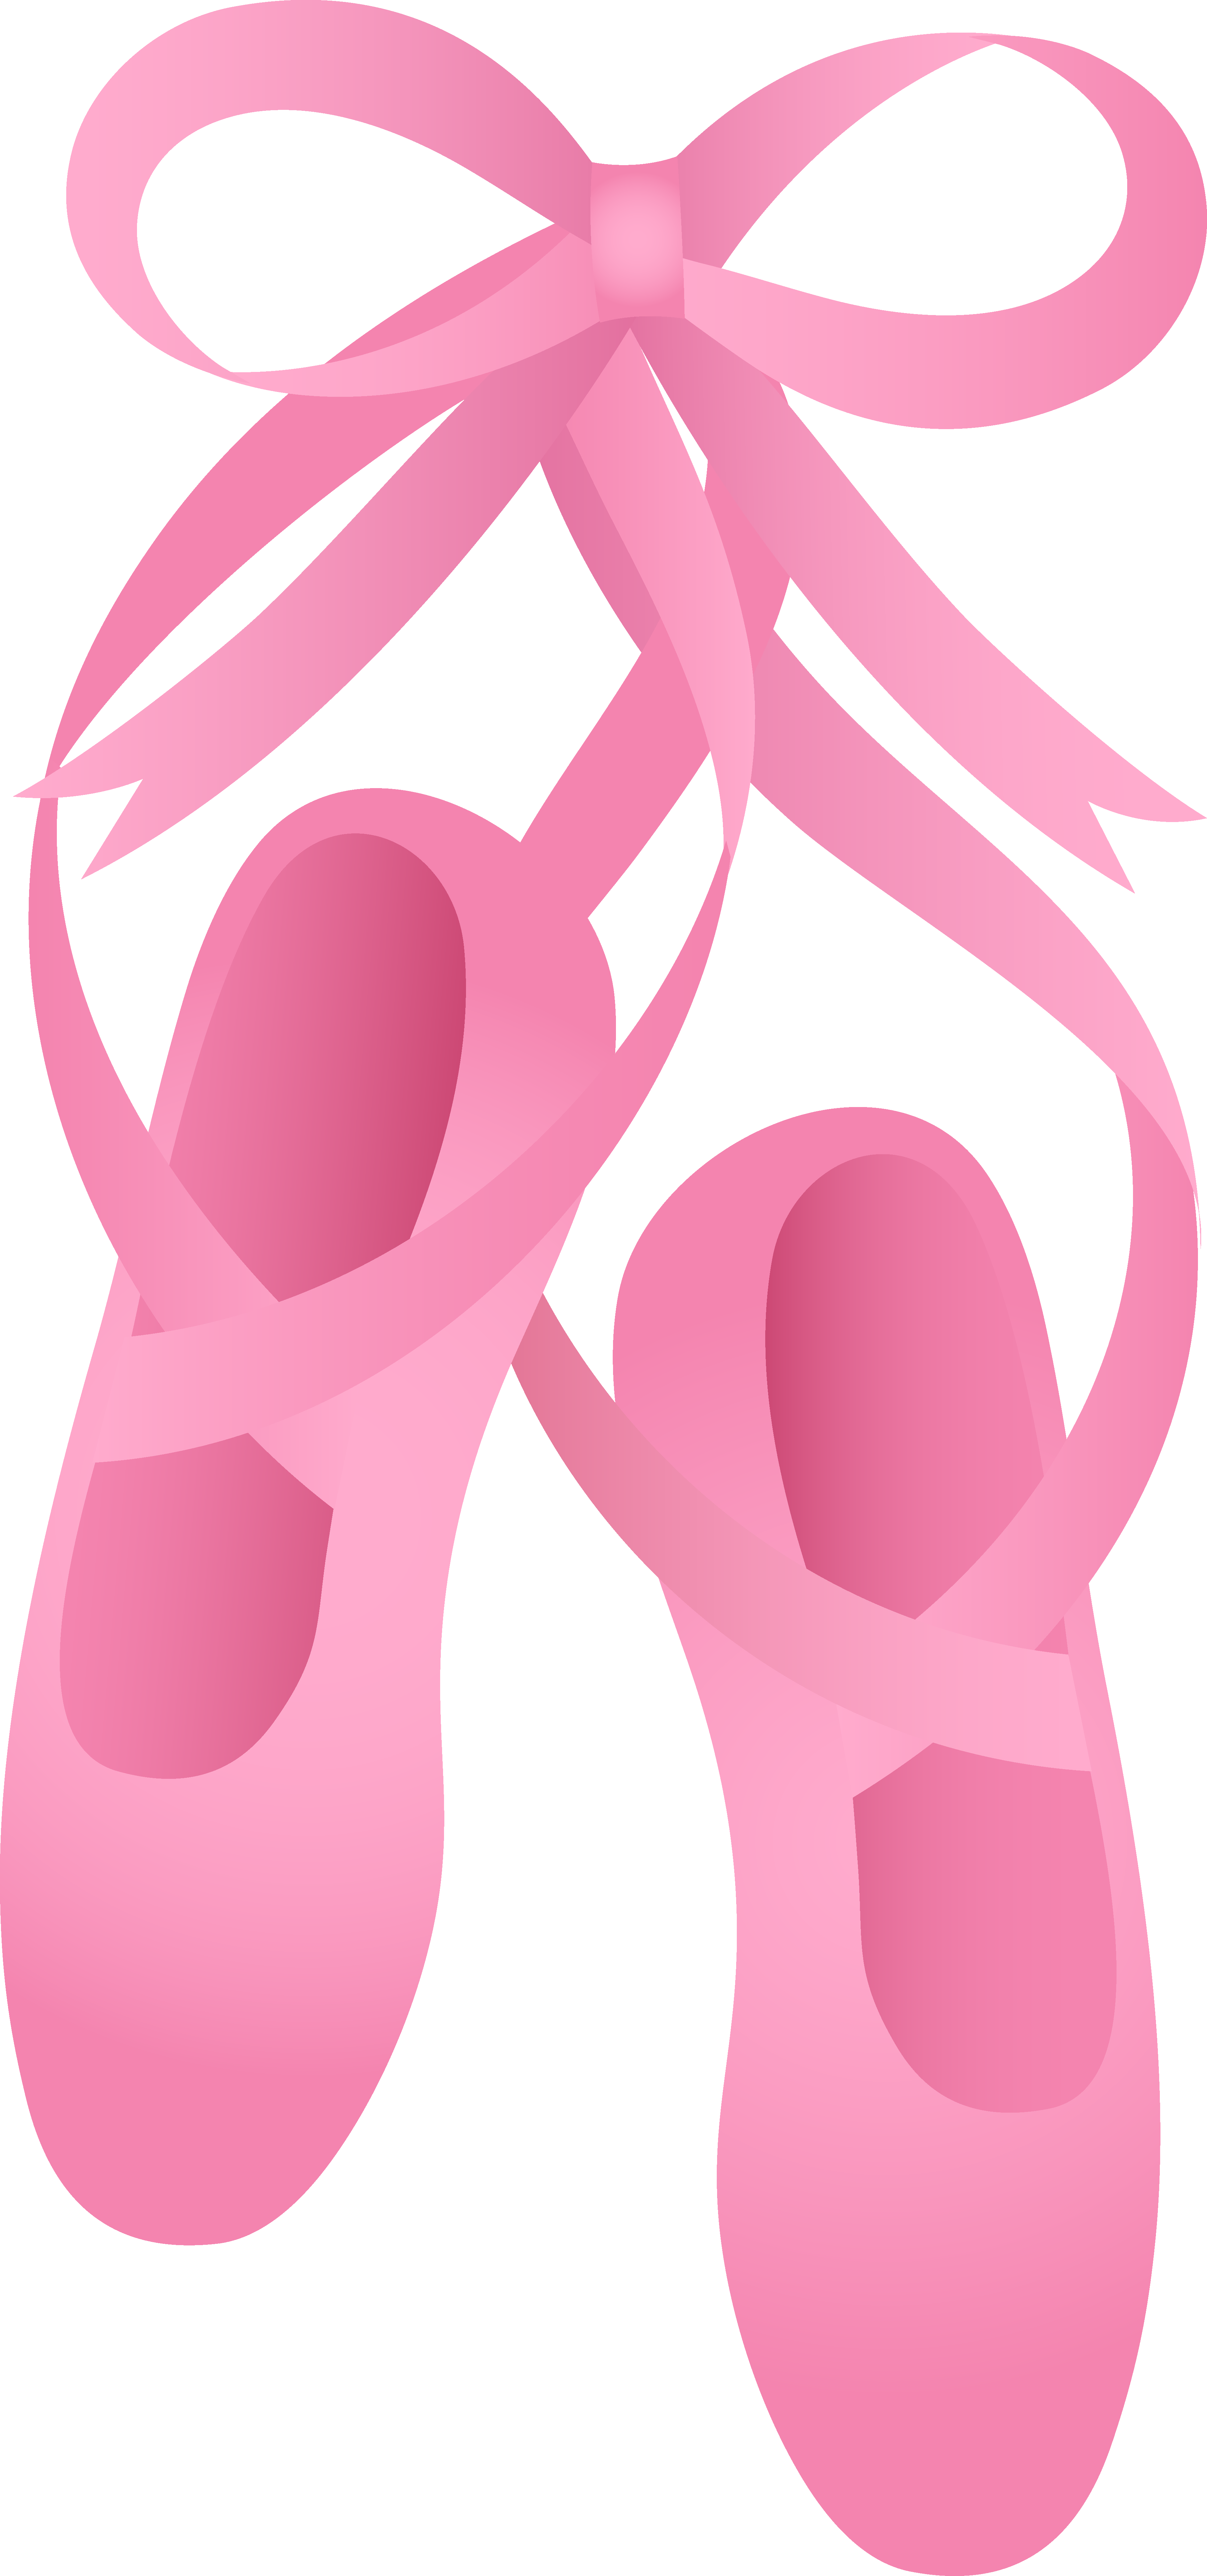 Free clip art of pretty pink ballet shoes More